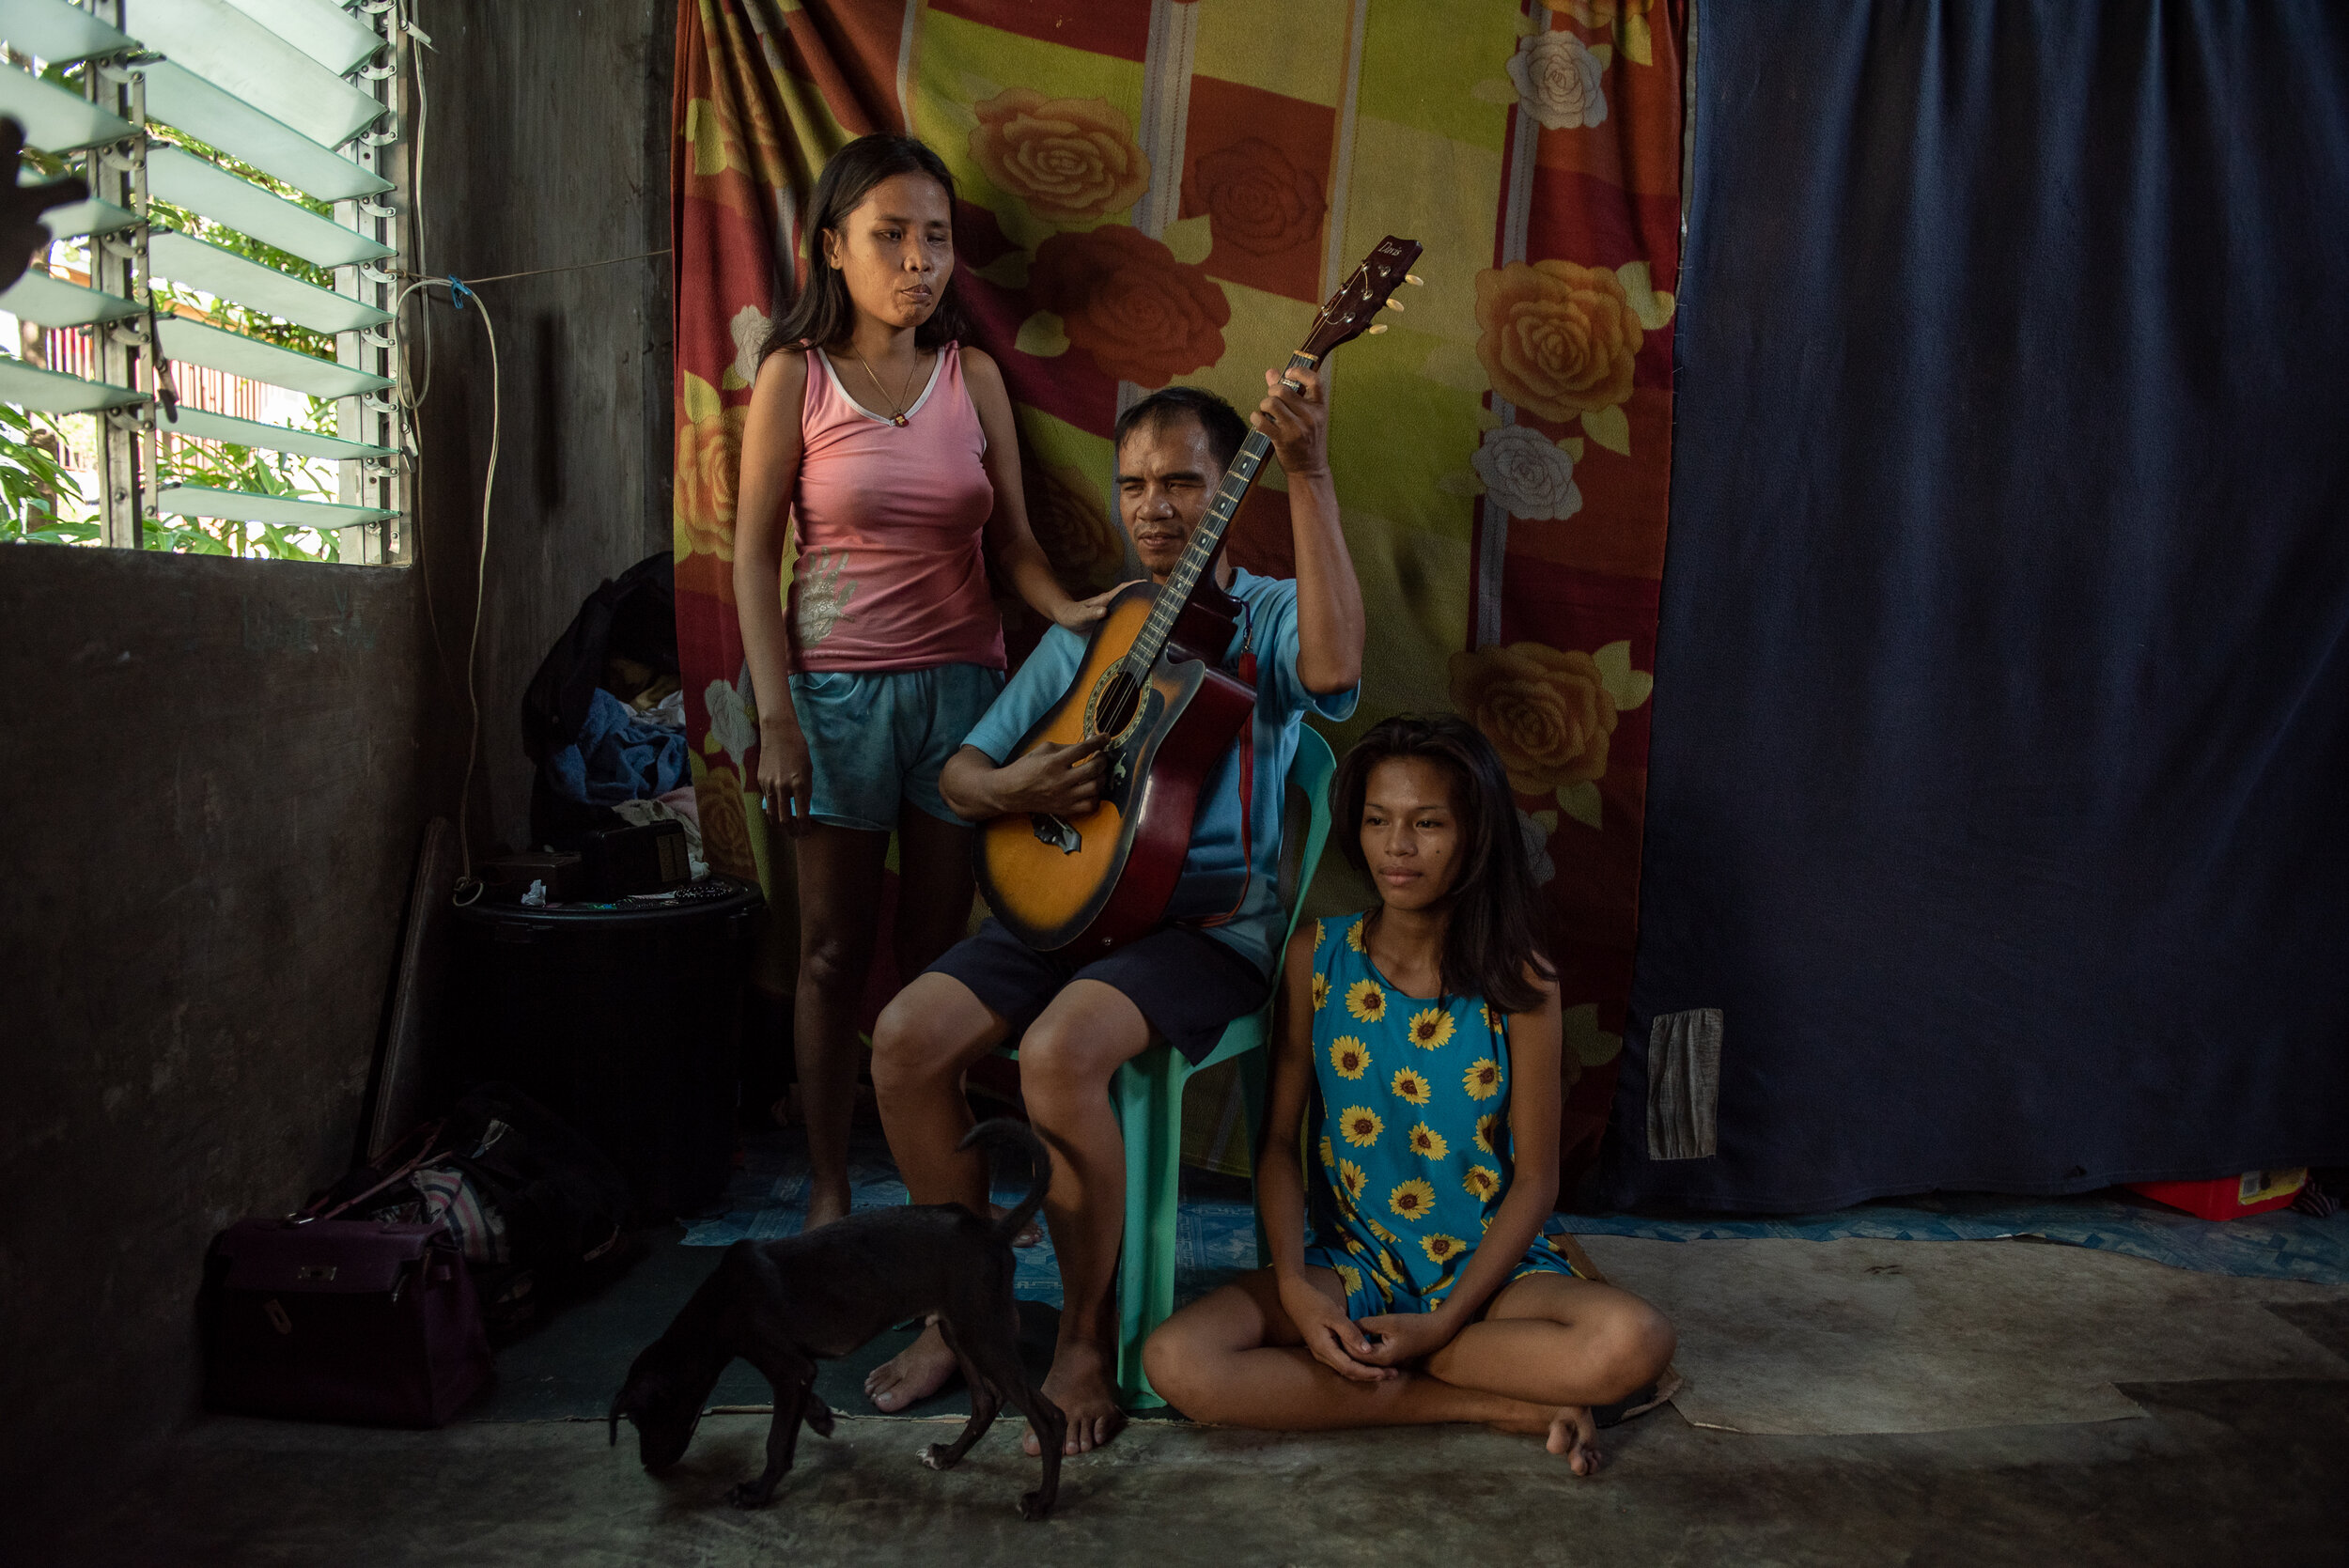  Typhoon Haiyan survivors Wenife Bacunata (left) and daughter Angelica Bacunata (right) sings while her father Joseph Bacunata (middle) plays the guitar. Before they were resettled, the blind couple earned their living by playing music at a local rad